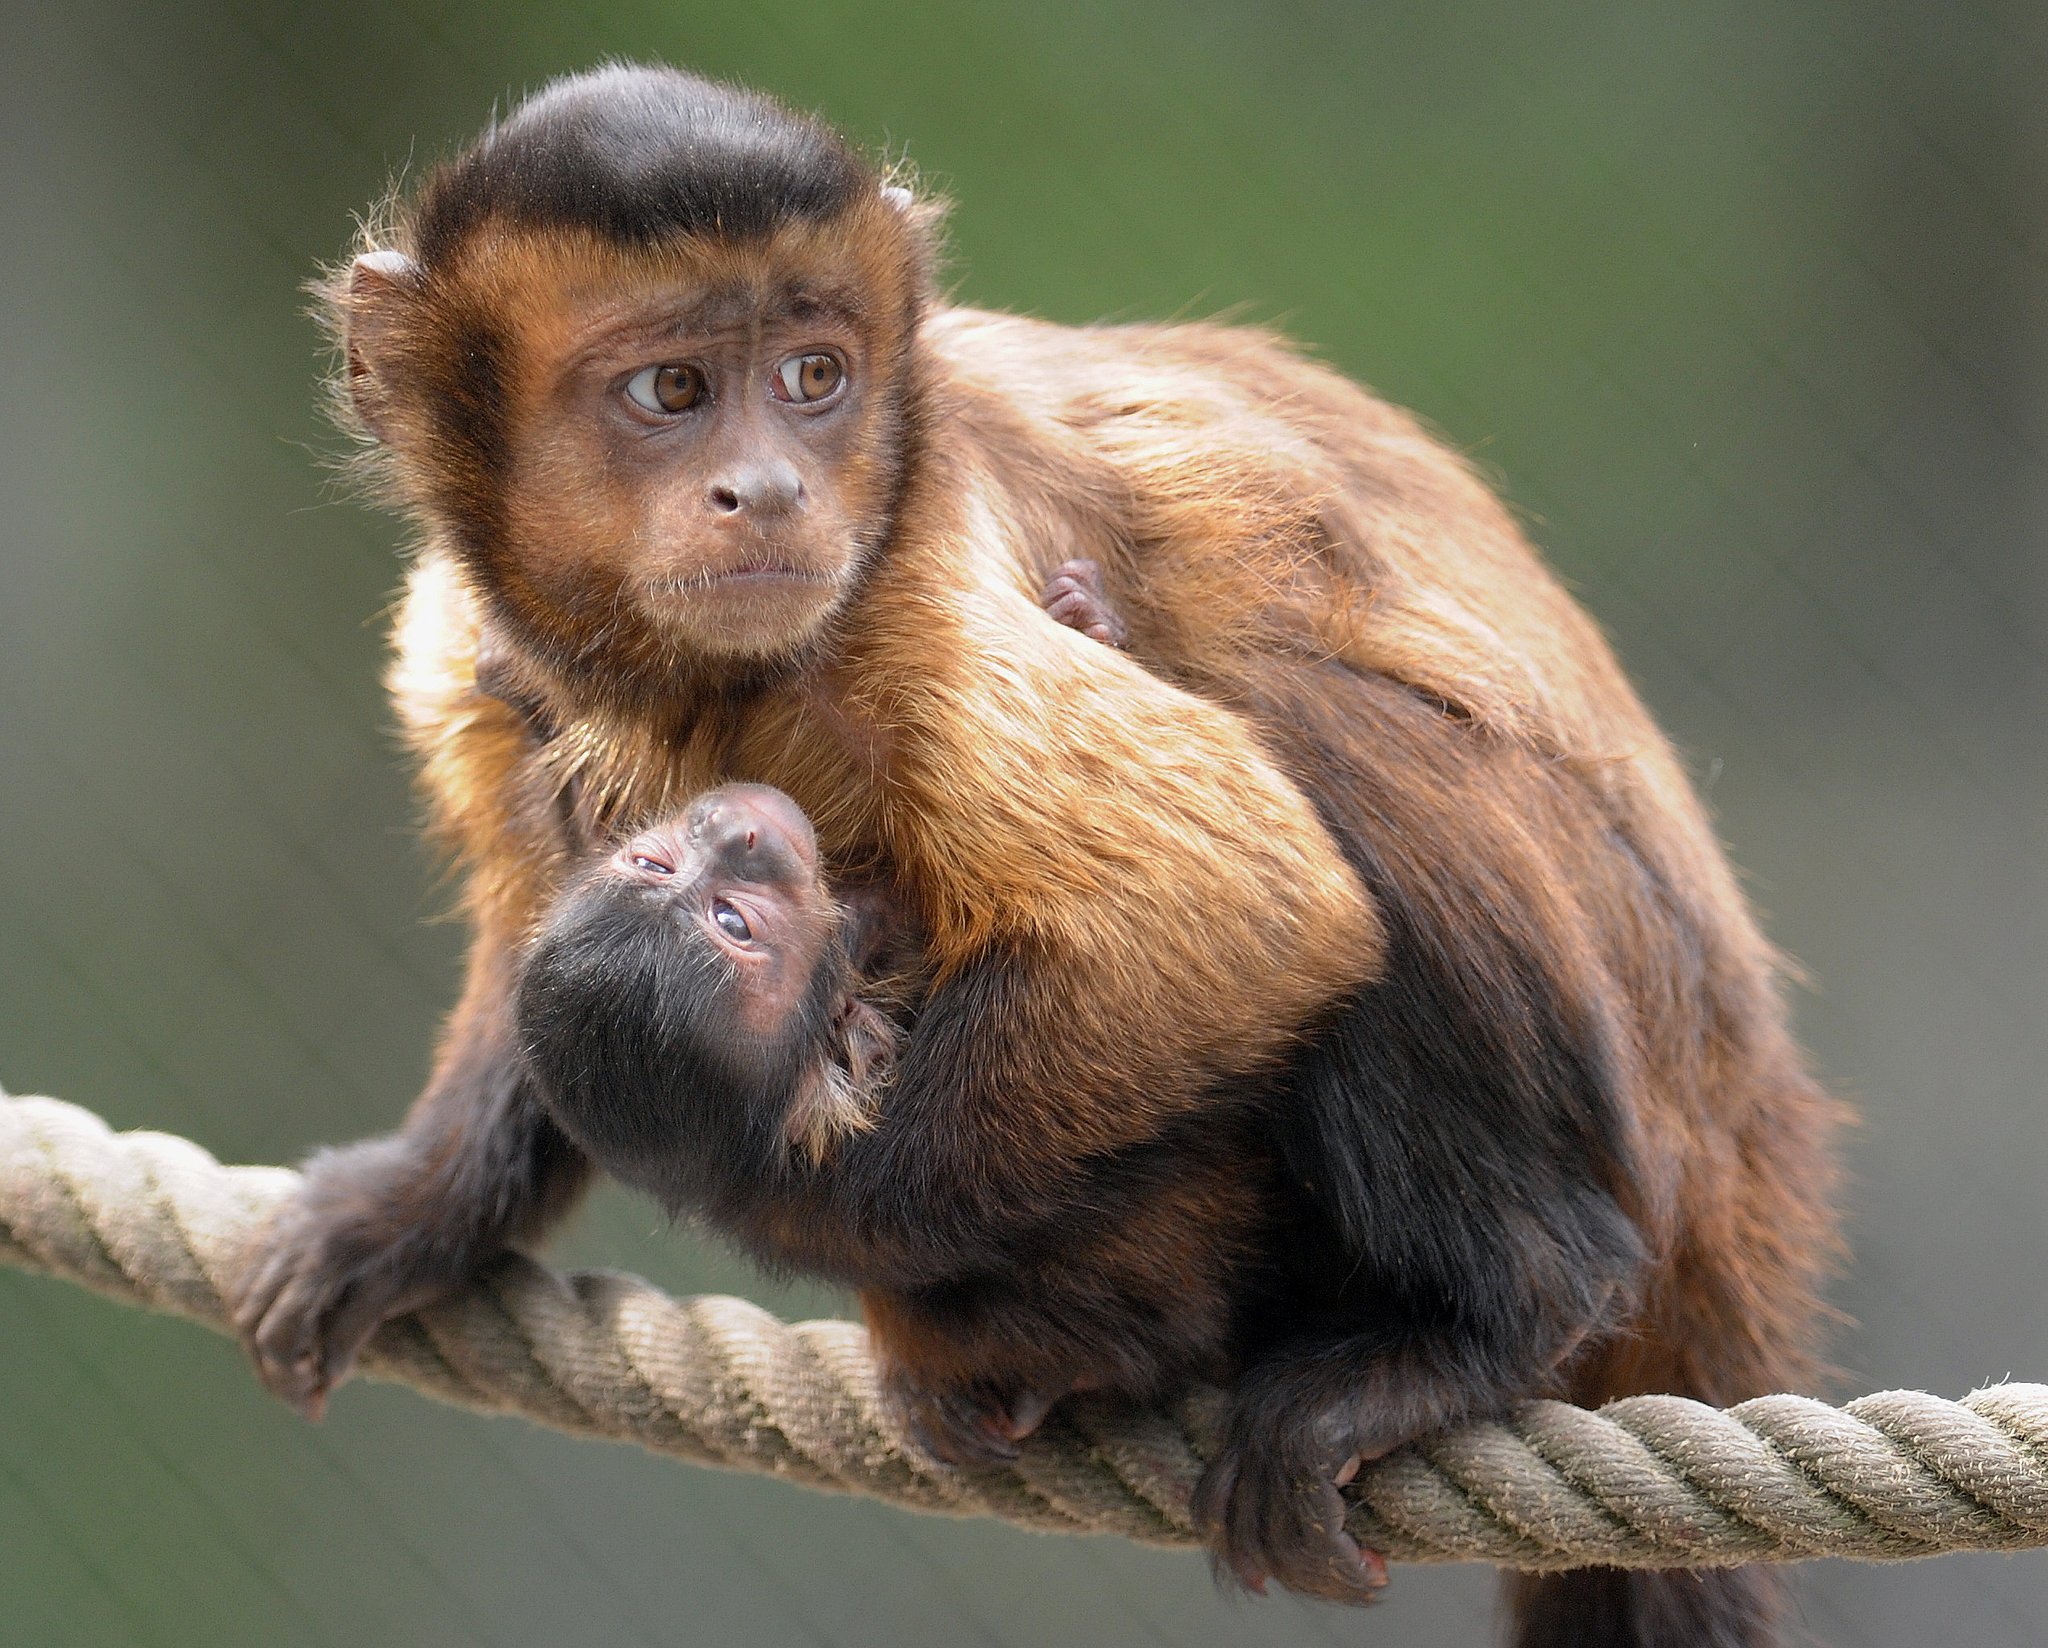 Capuchin Monkeys Got Their Name From The Friars Of The Order Friars